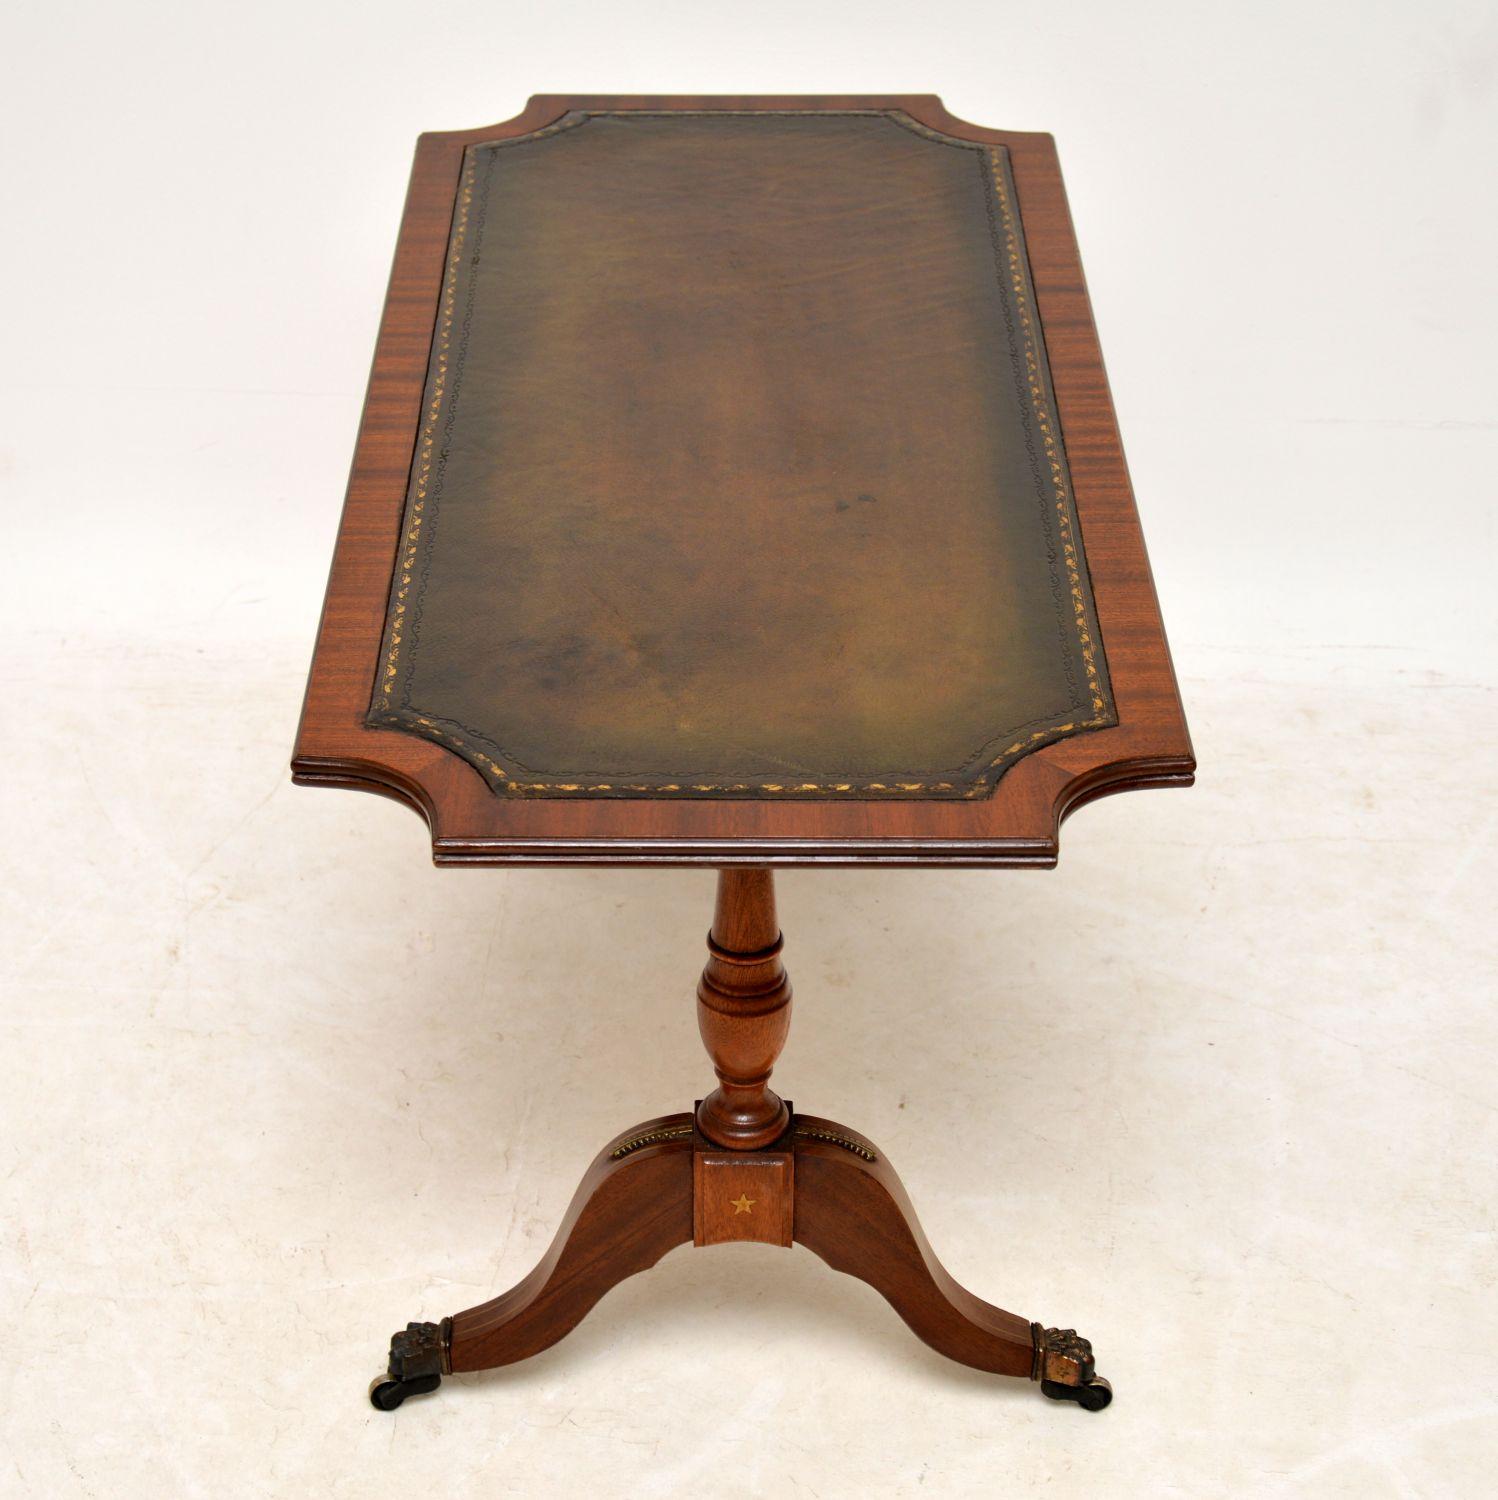 English Antique Regency Style Mahogany Leather Topped Coffee Table